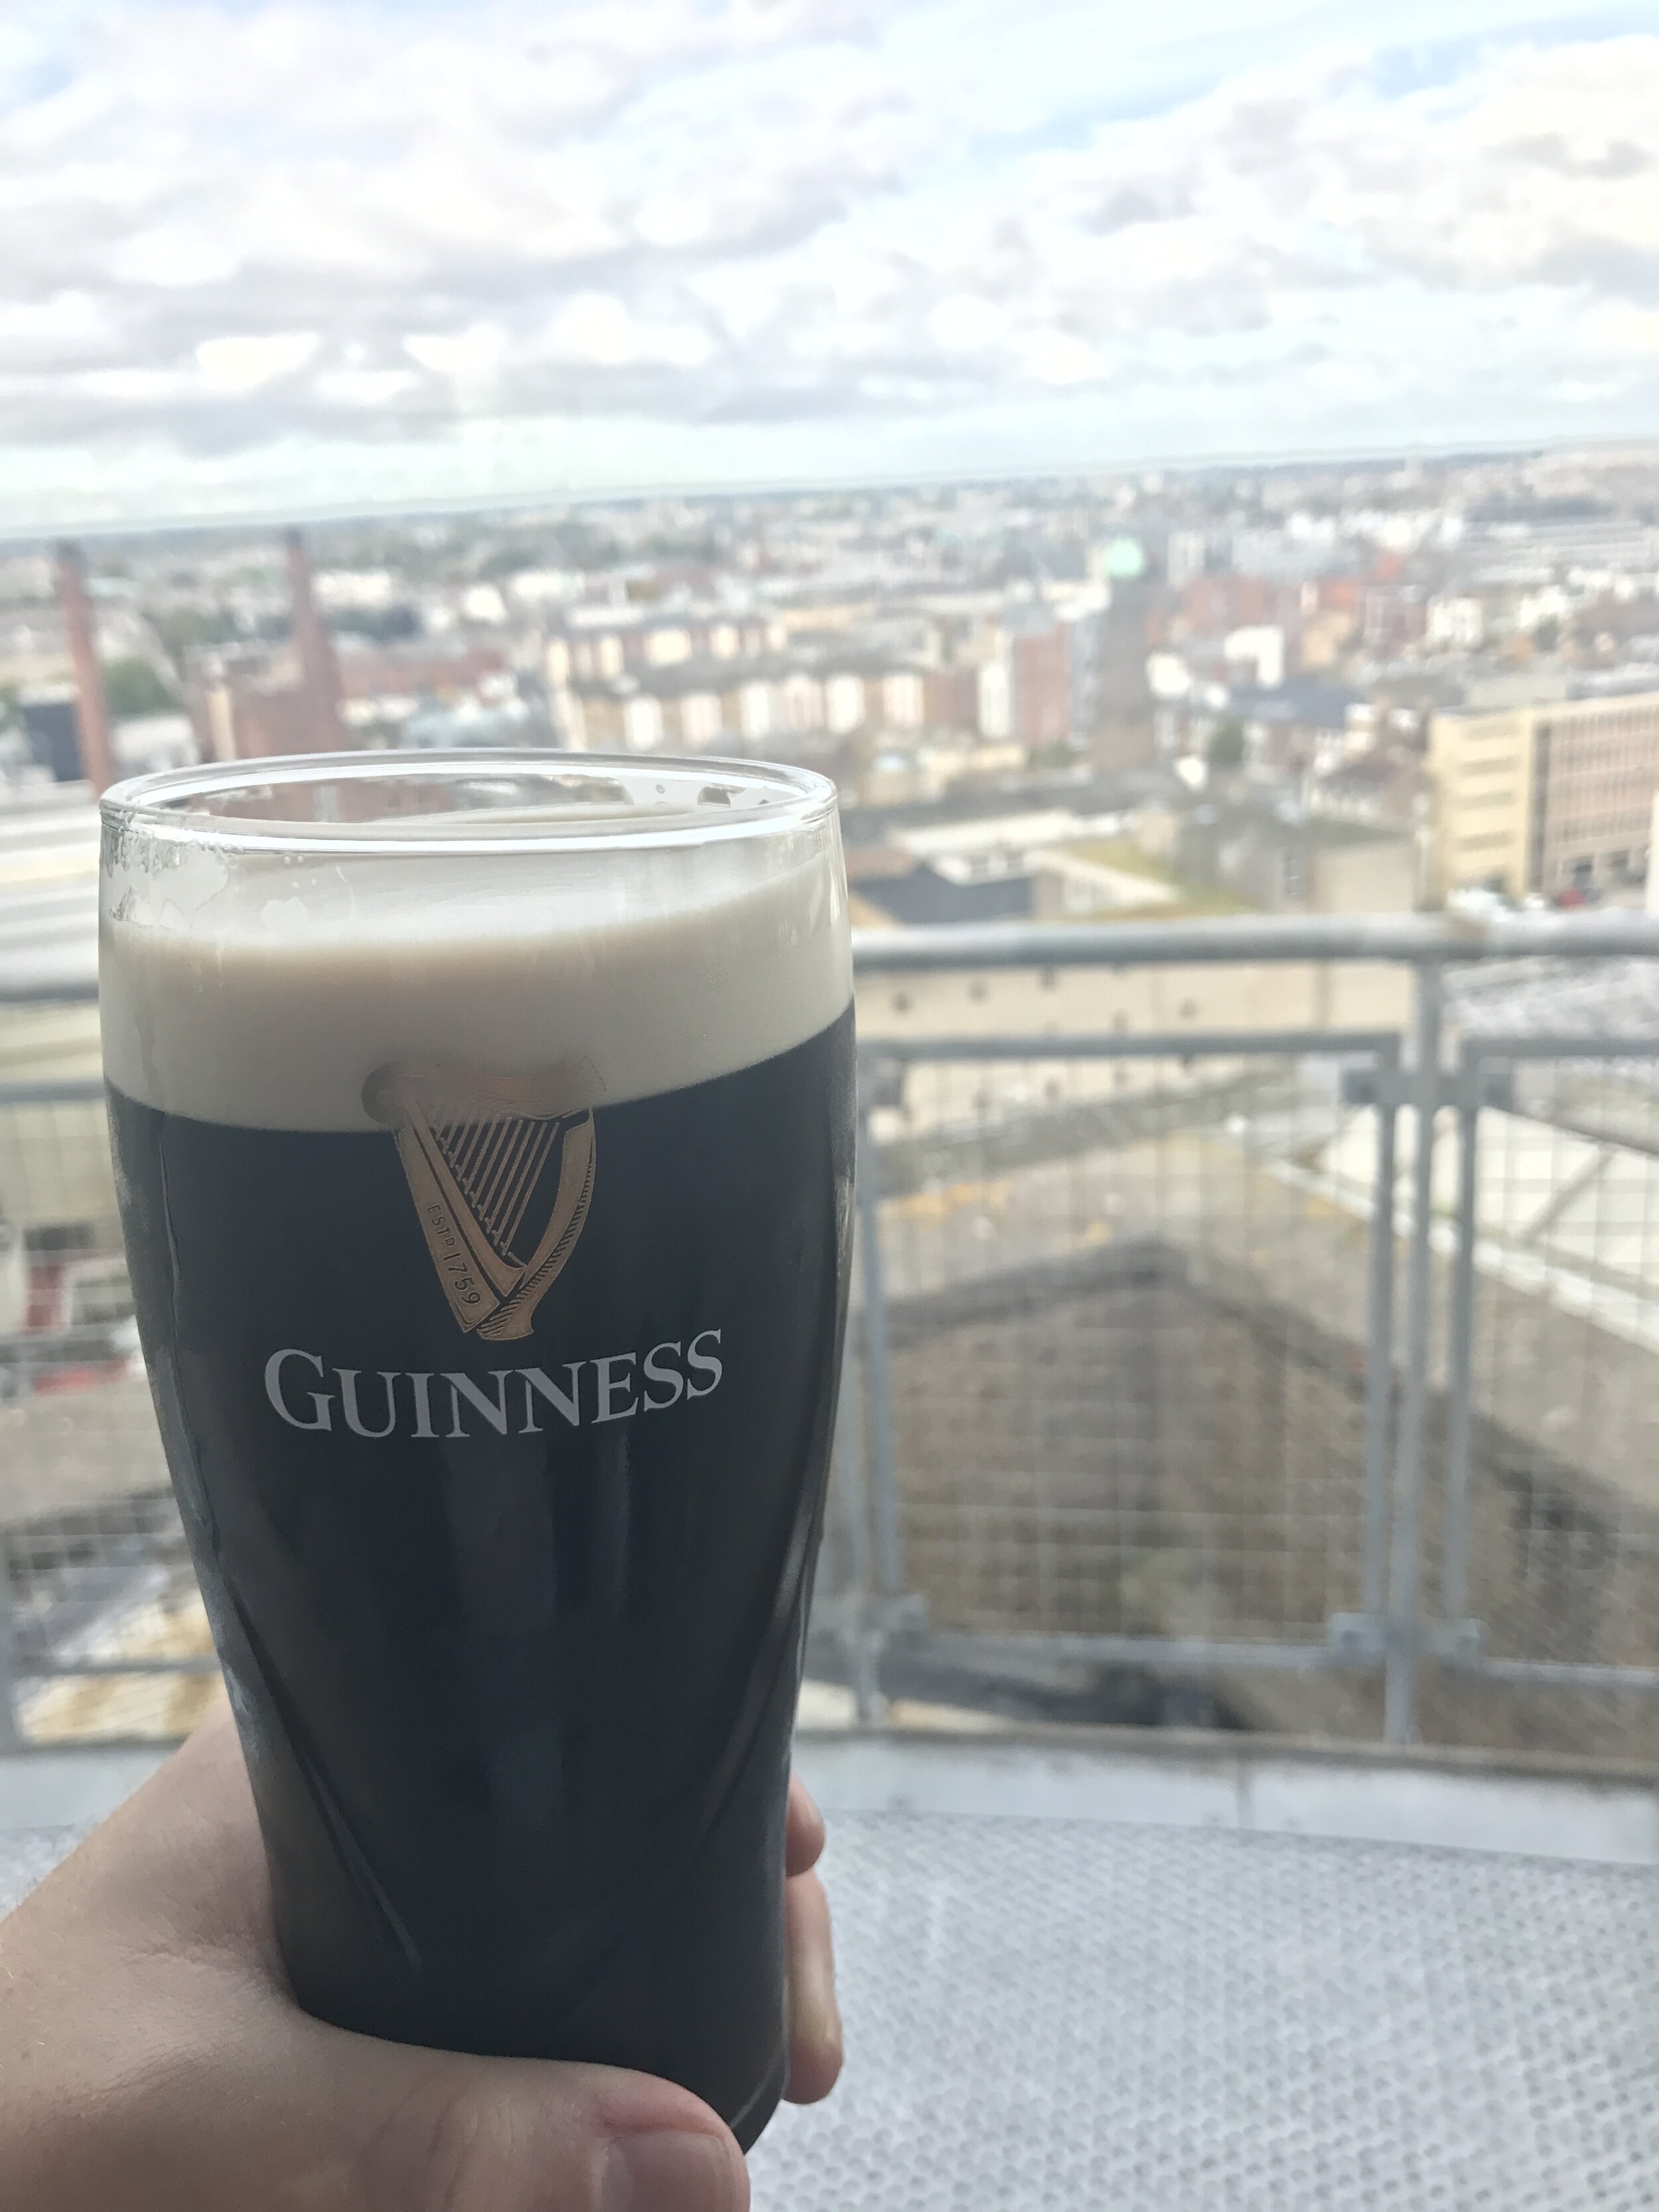  [lips smack] The perks of international travel, a Guinness direct from the source! 